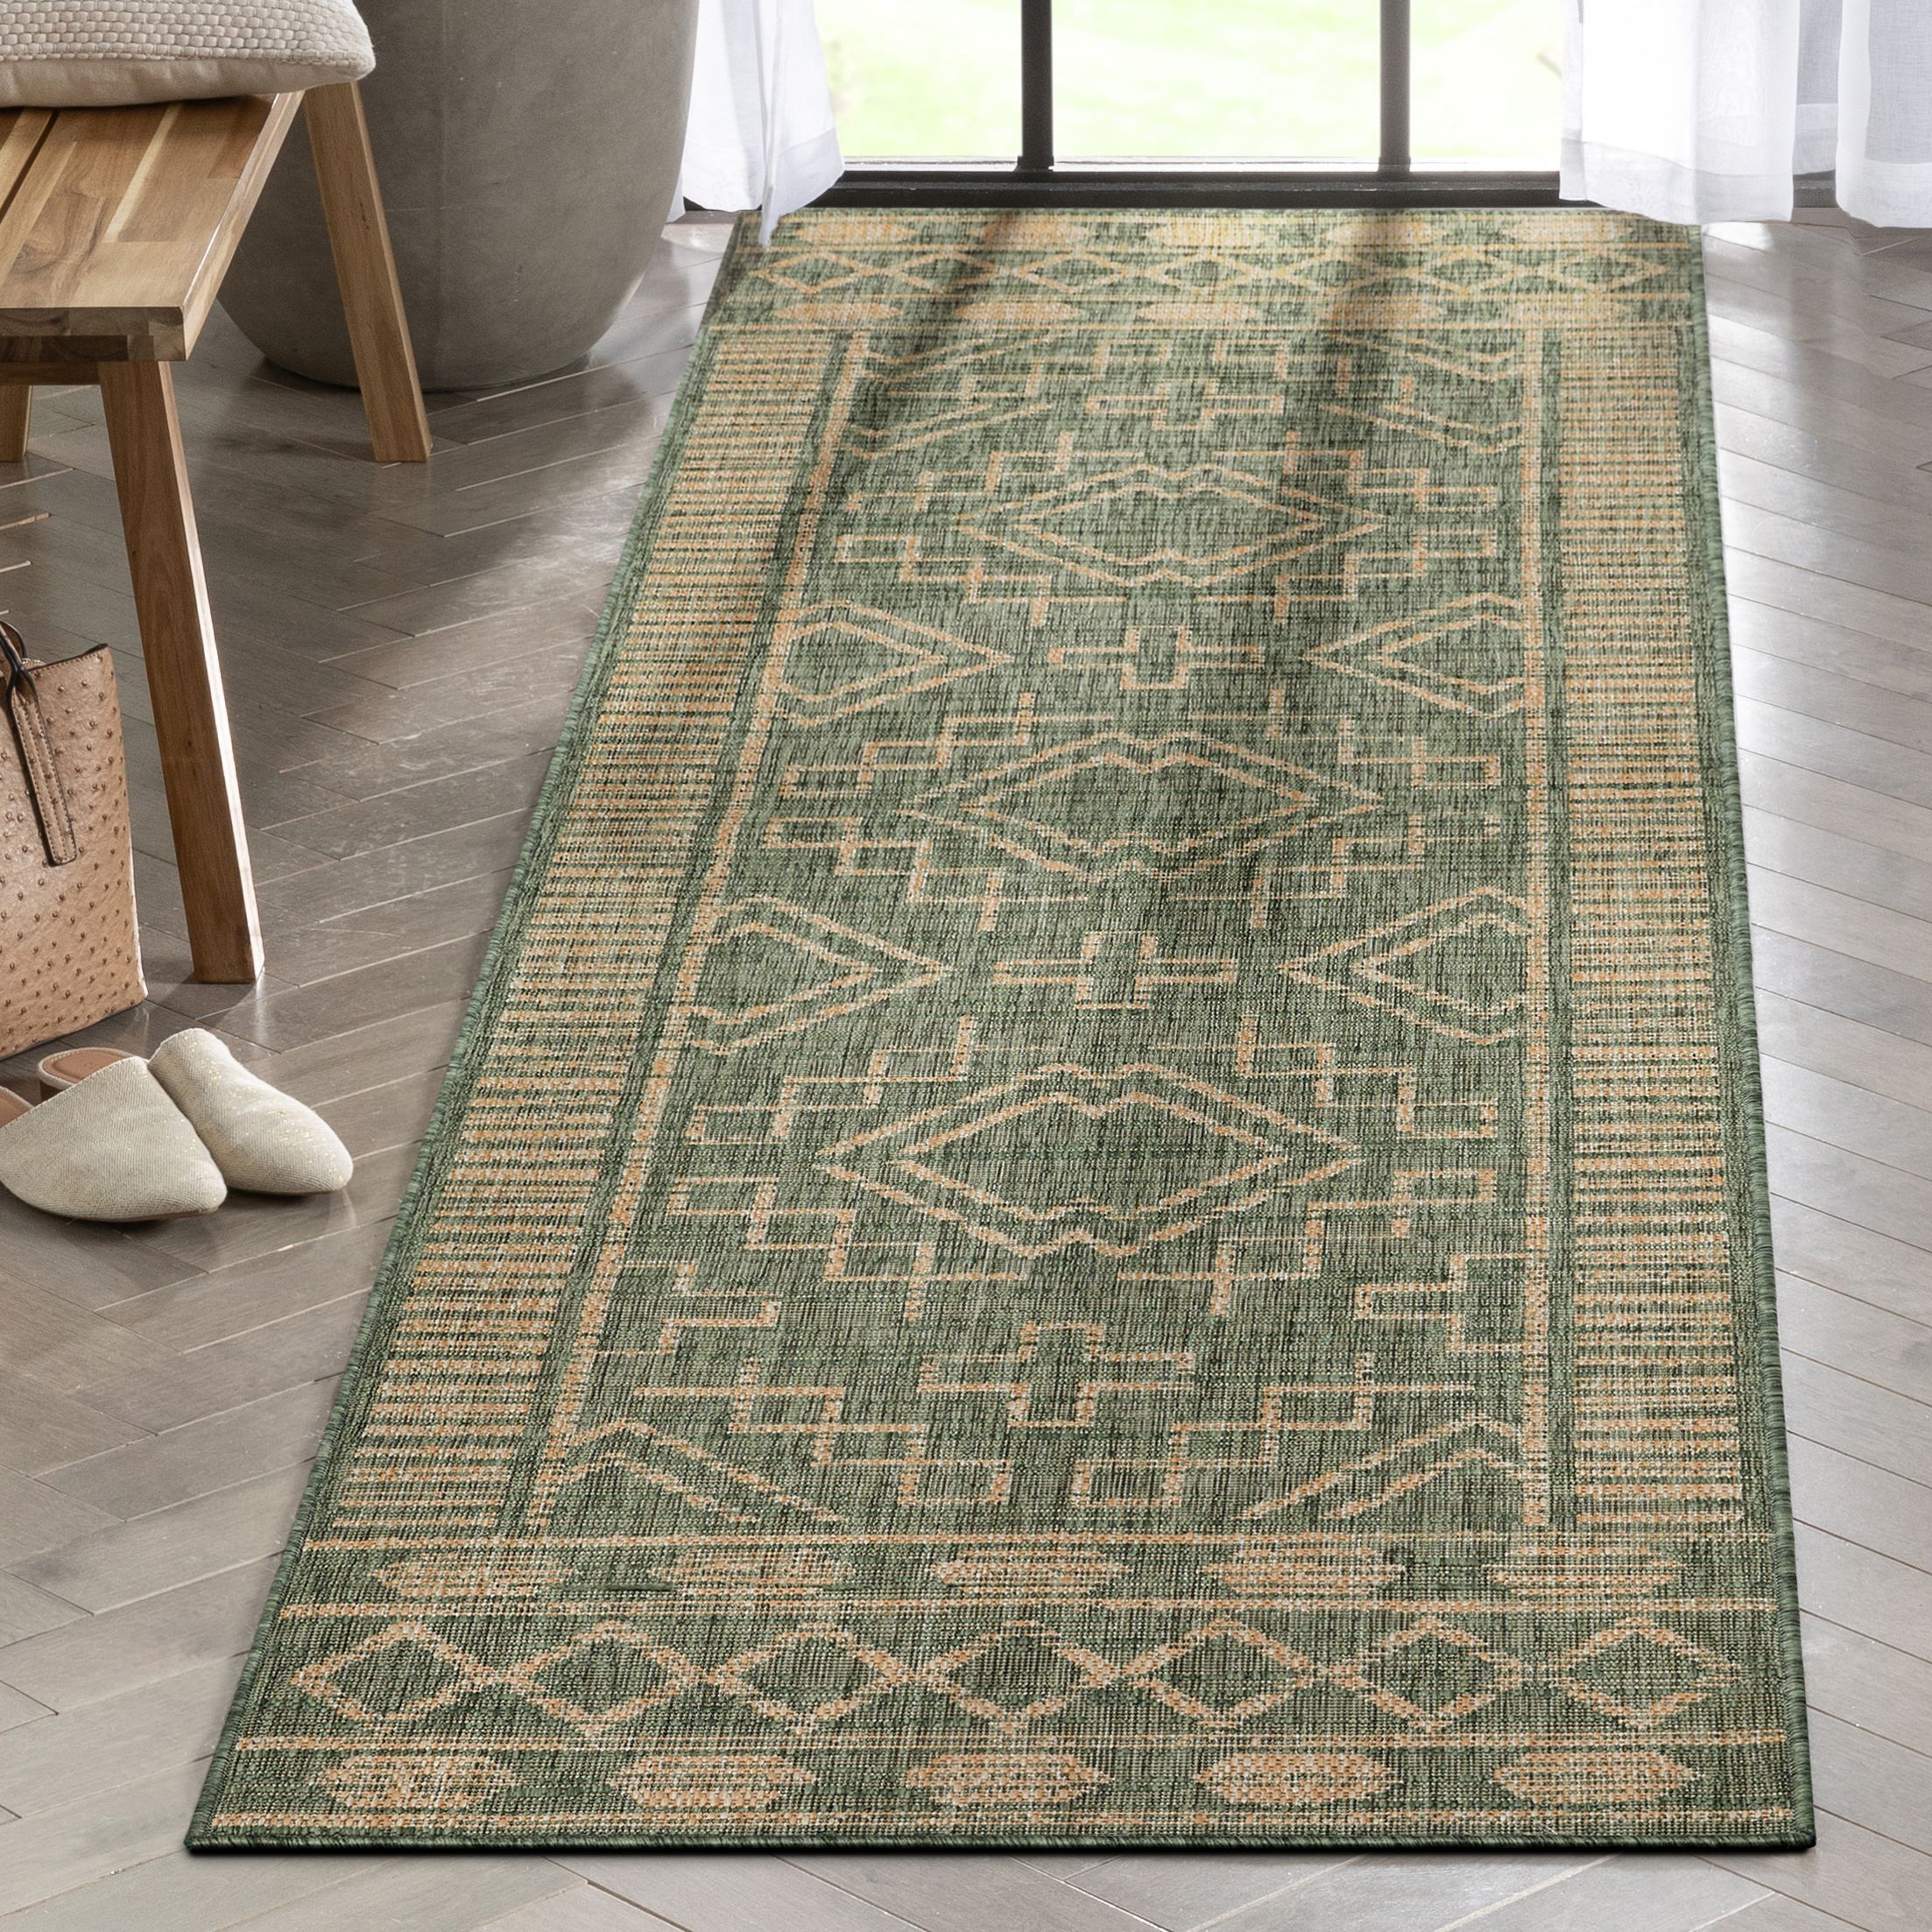 2 x 9 Rugs at Lowes.com